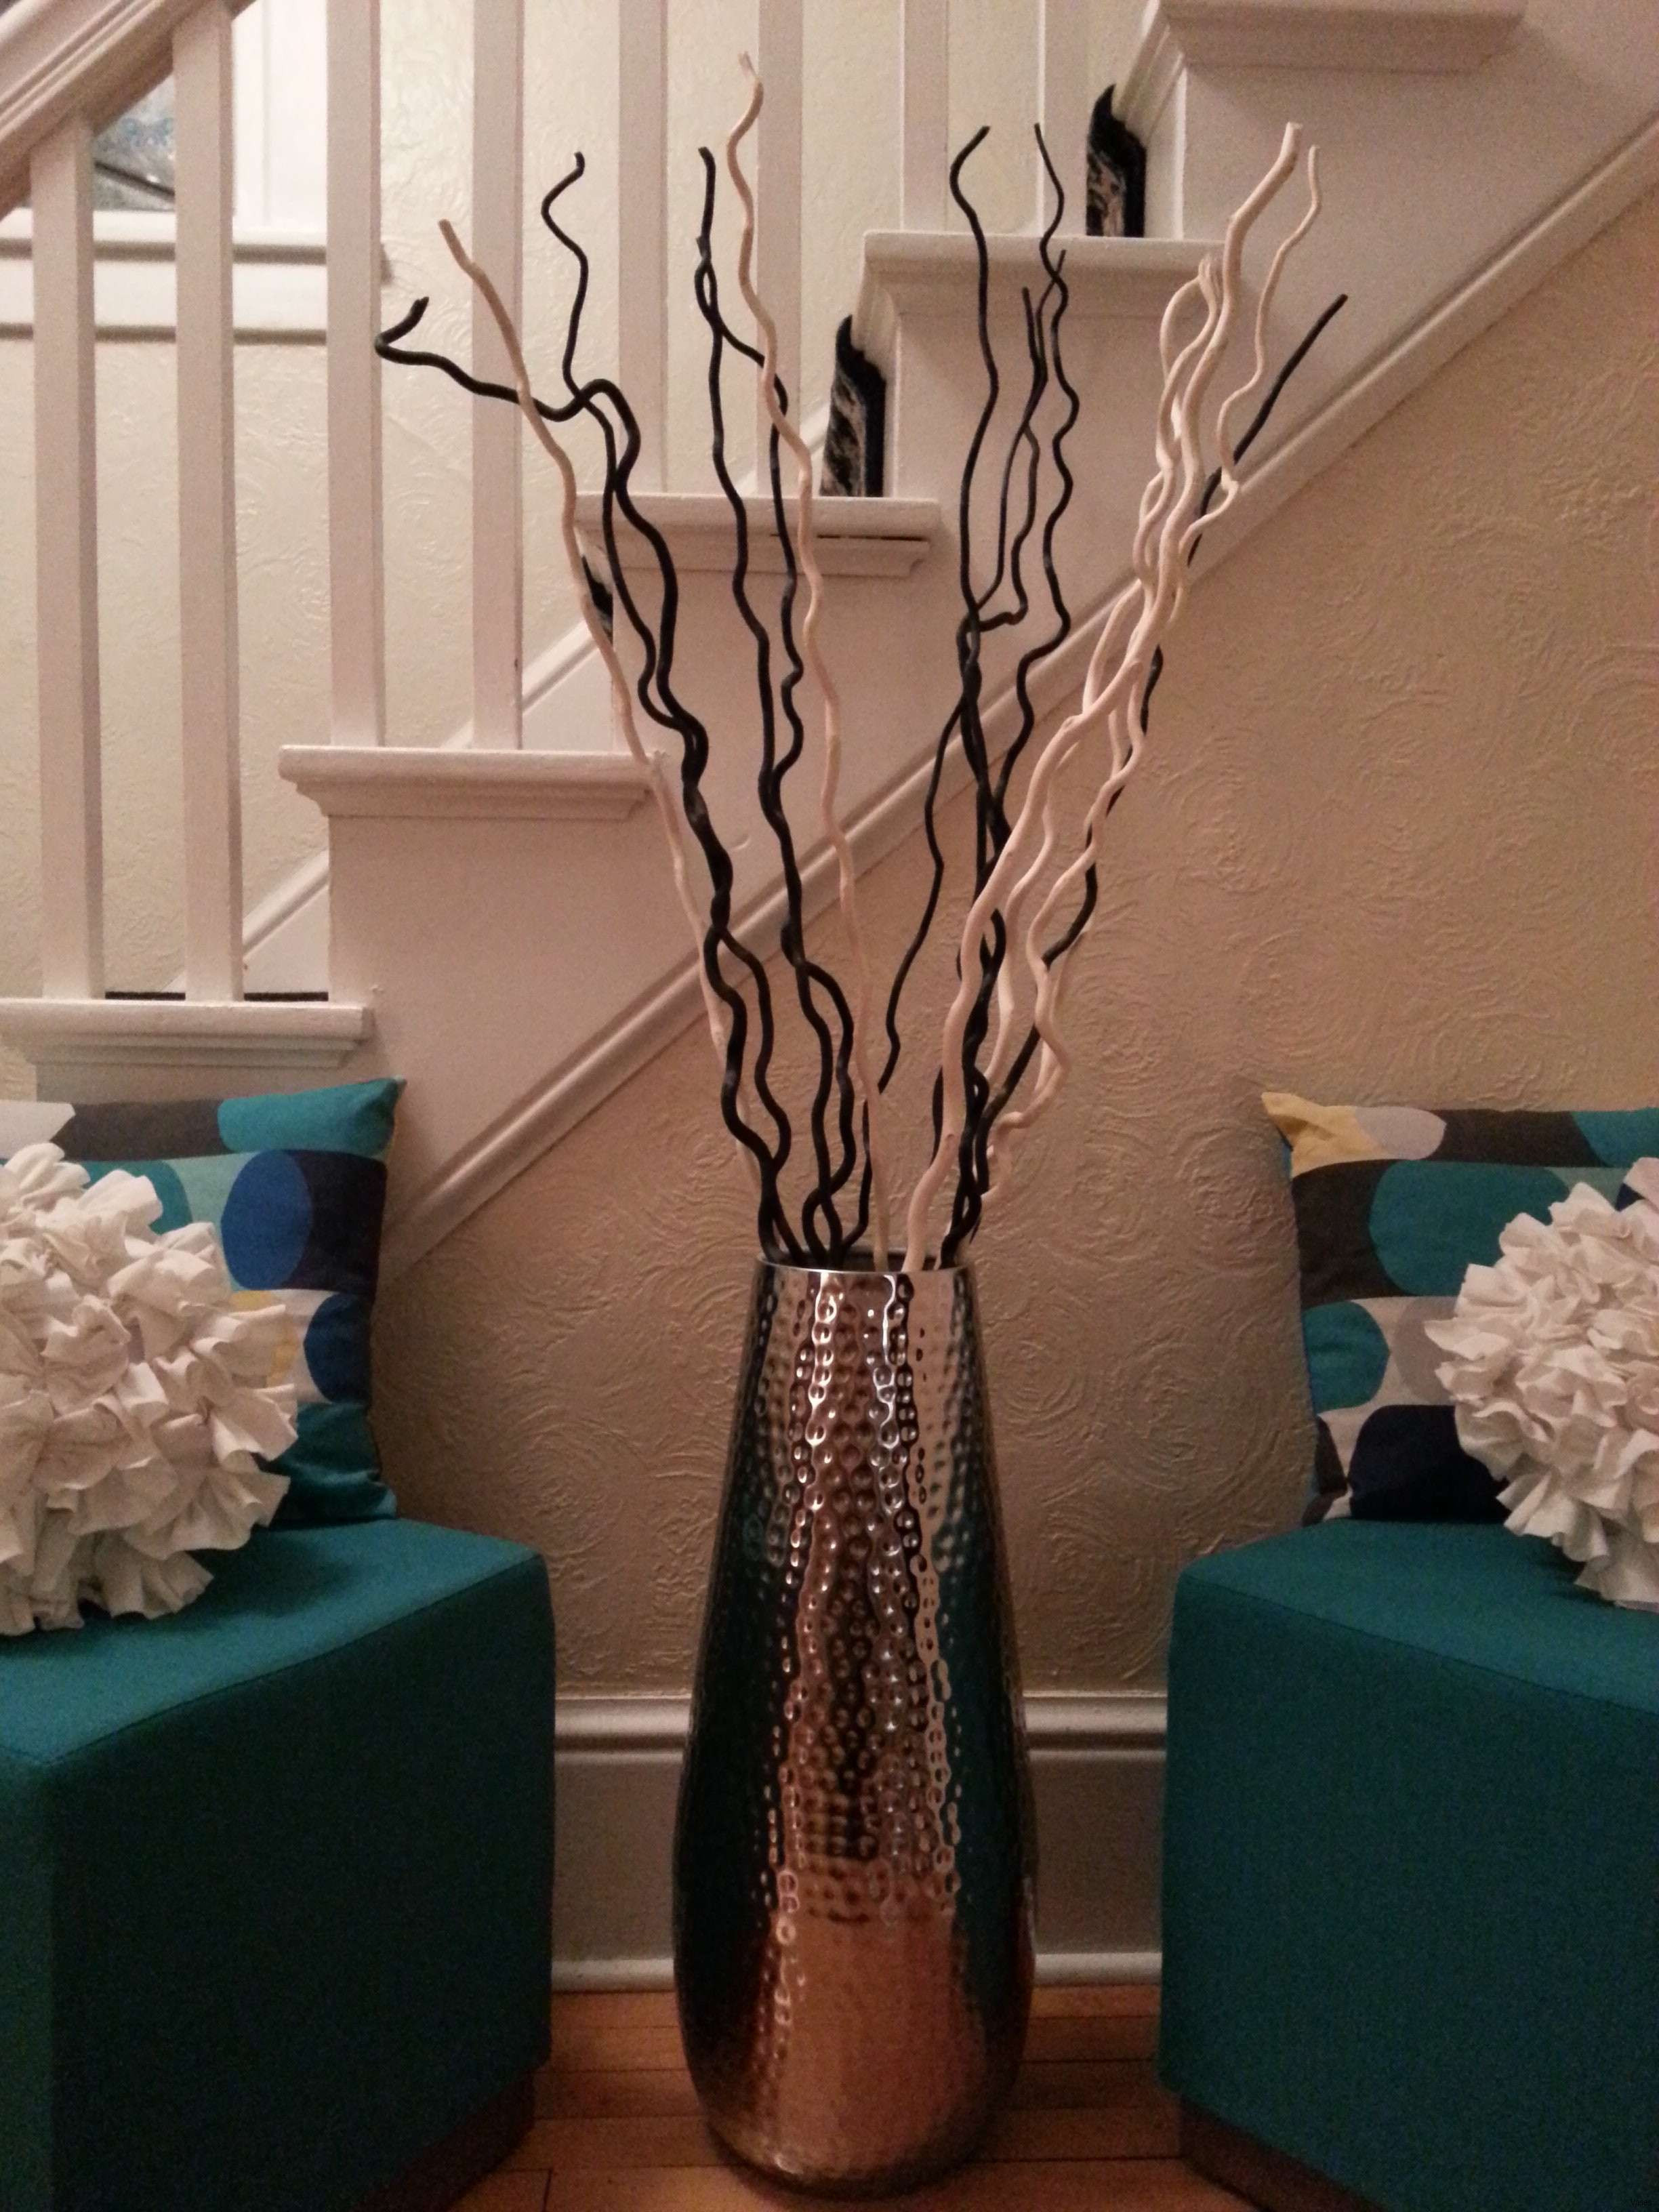 Dollar Tree Tall Vases Of Decorative Twig Tree New Dollar Tree Wedding Decorations Awesome H Intended for Decorative Twig Tree New Dollar Tree Wedding Decorations Awesome H Vases Dollar Vase I 0d